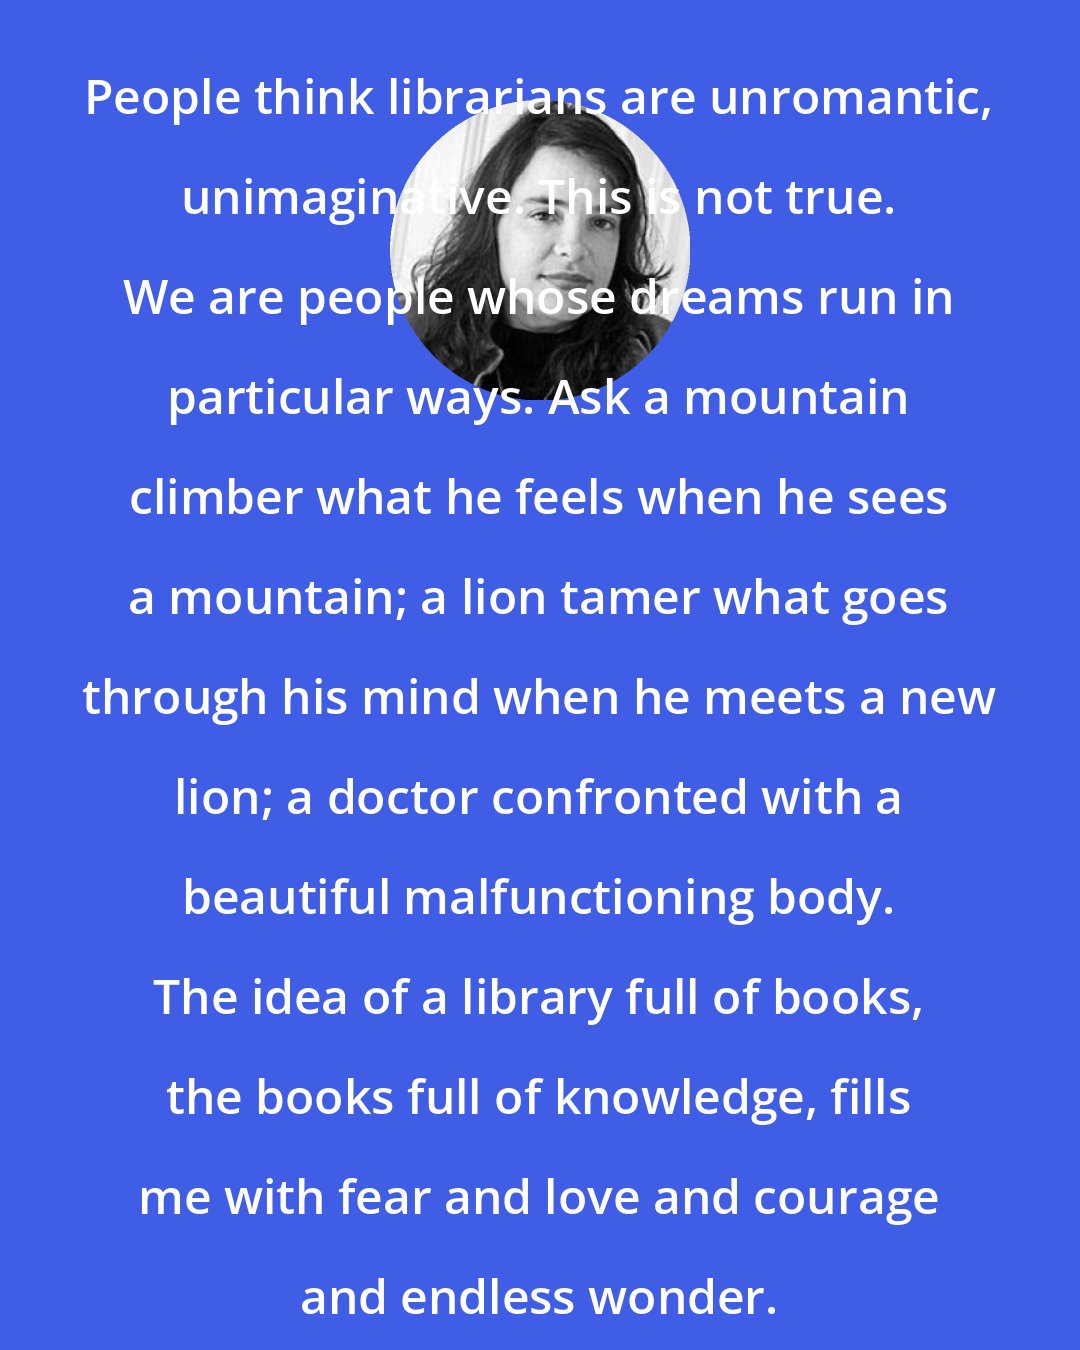 Elizabeth McCracken: People think librarians are unromantic, unimaginative. This is not true. We are people whose dreams run in particular ways. Ask a mountain climber what he feels when he sees a mountain; a lion tamer what goes through his mind when he meets a new lion; a doctor confronted with a beautiful malfunctioning body. The idea of a library full of books, the books full of knowledge, fills me with fear and love and courage and endless wonder.